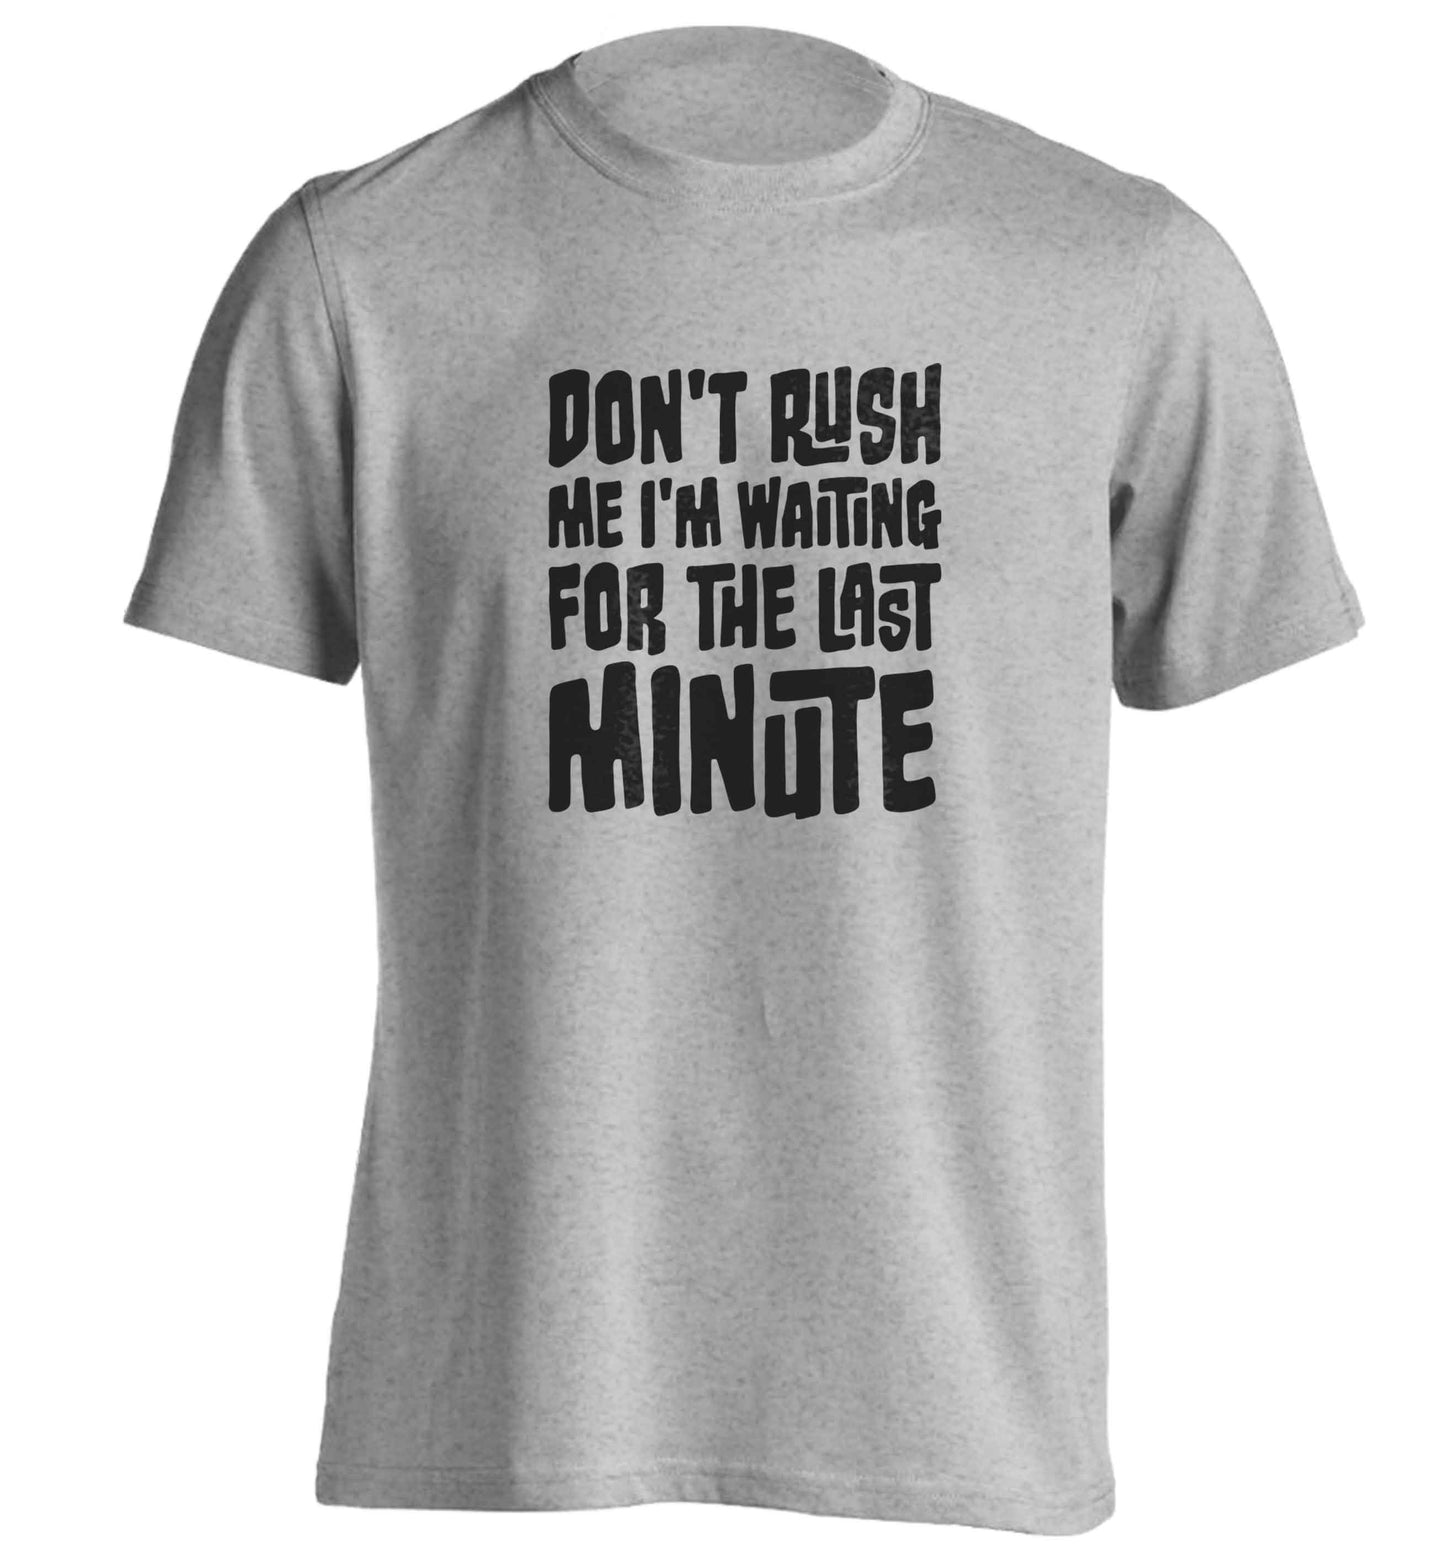 Don't rush me I'm waiting for the last minute adults unisex grey Tshirt 2XL